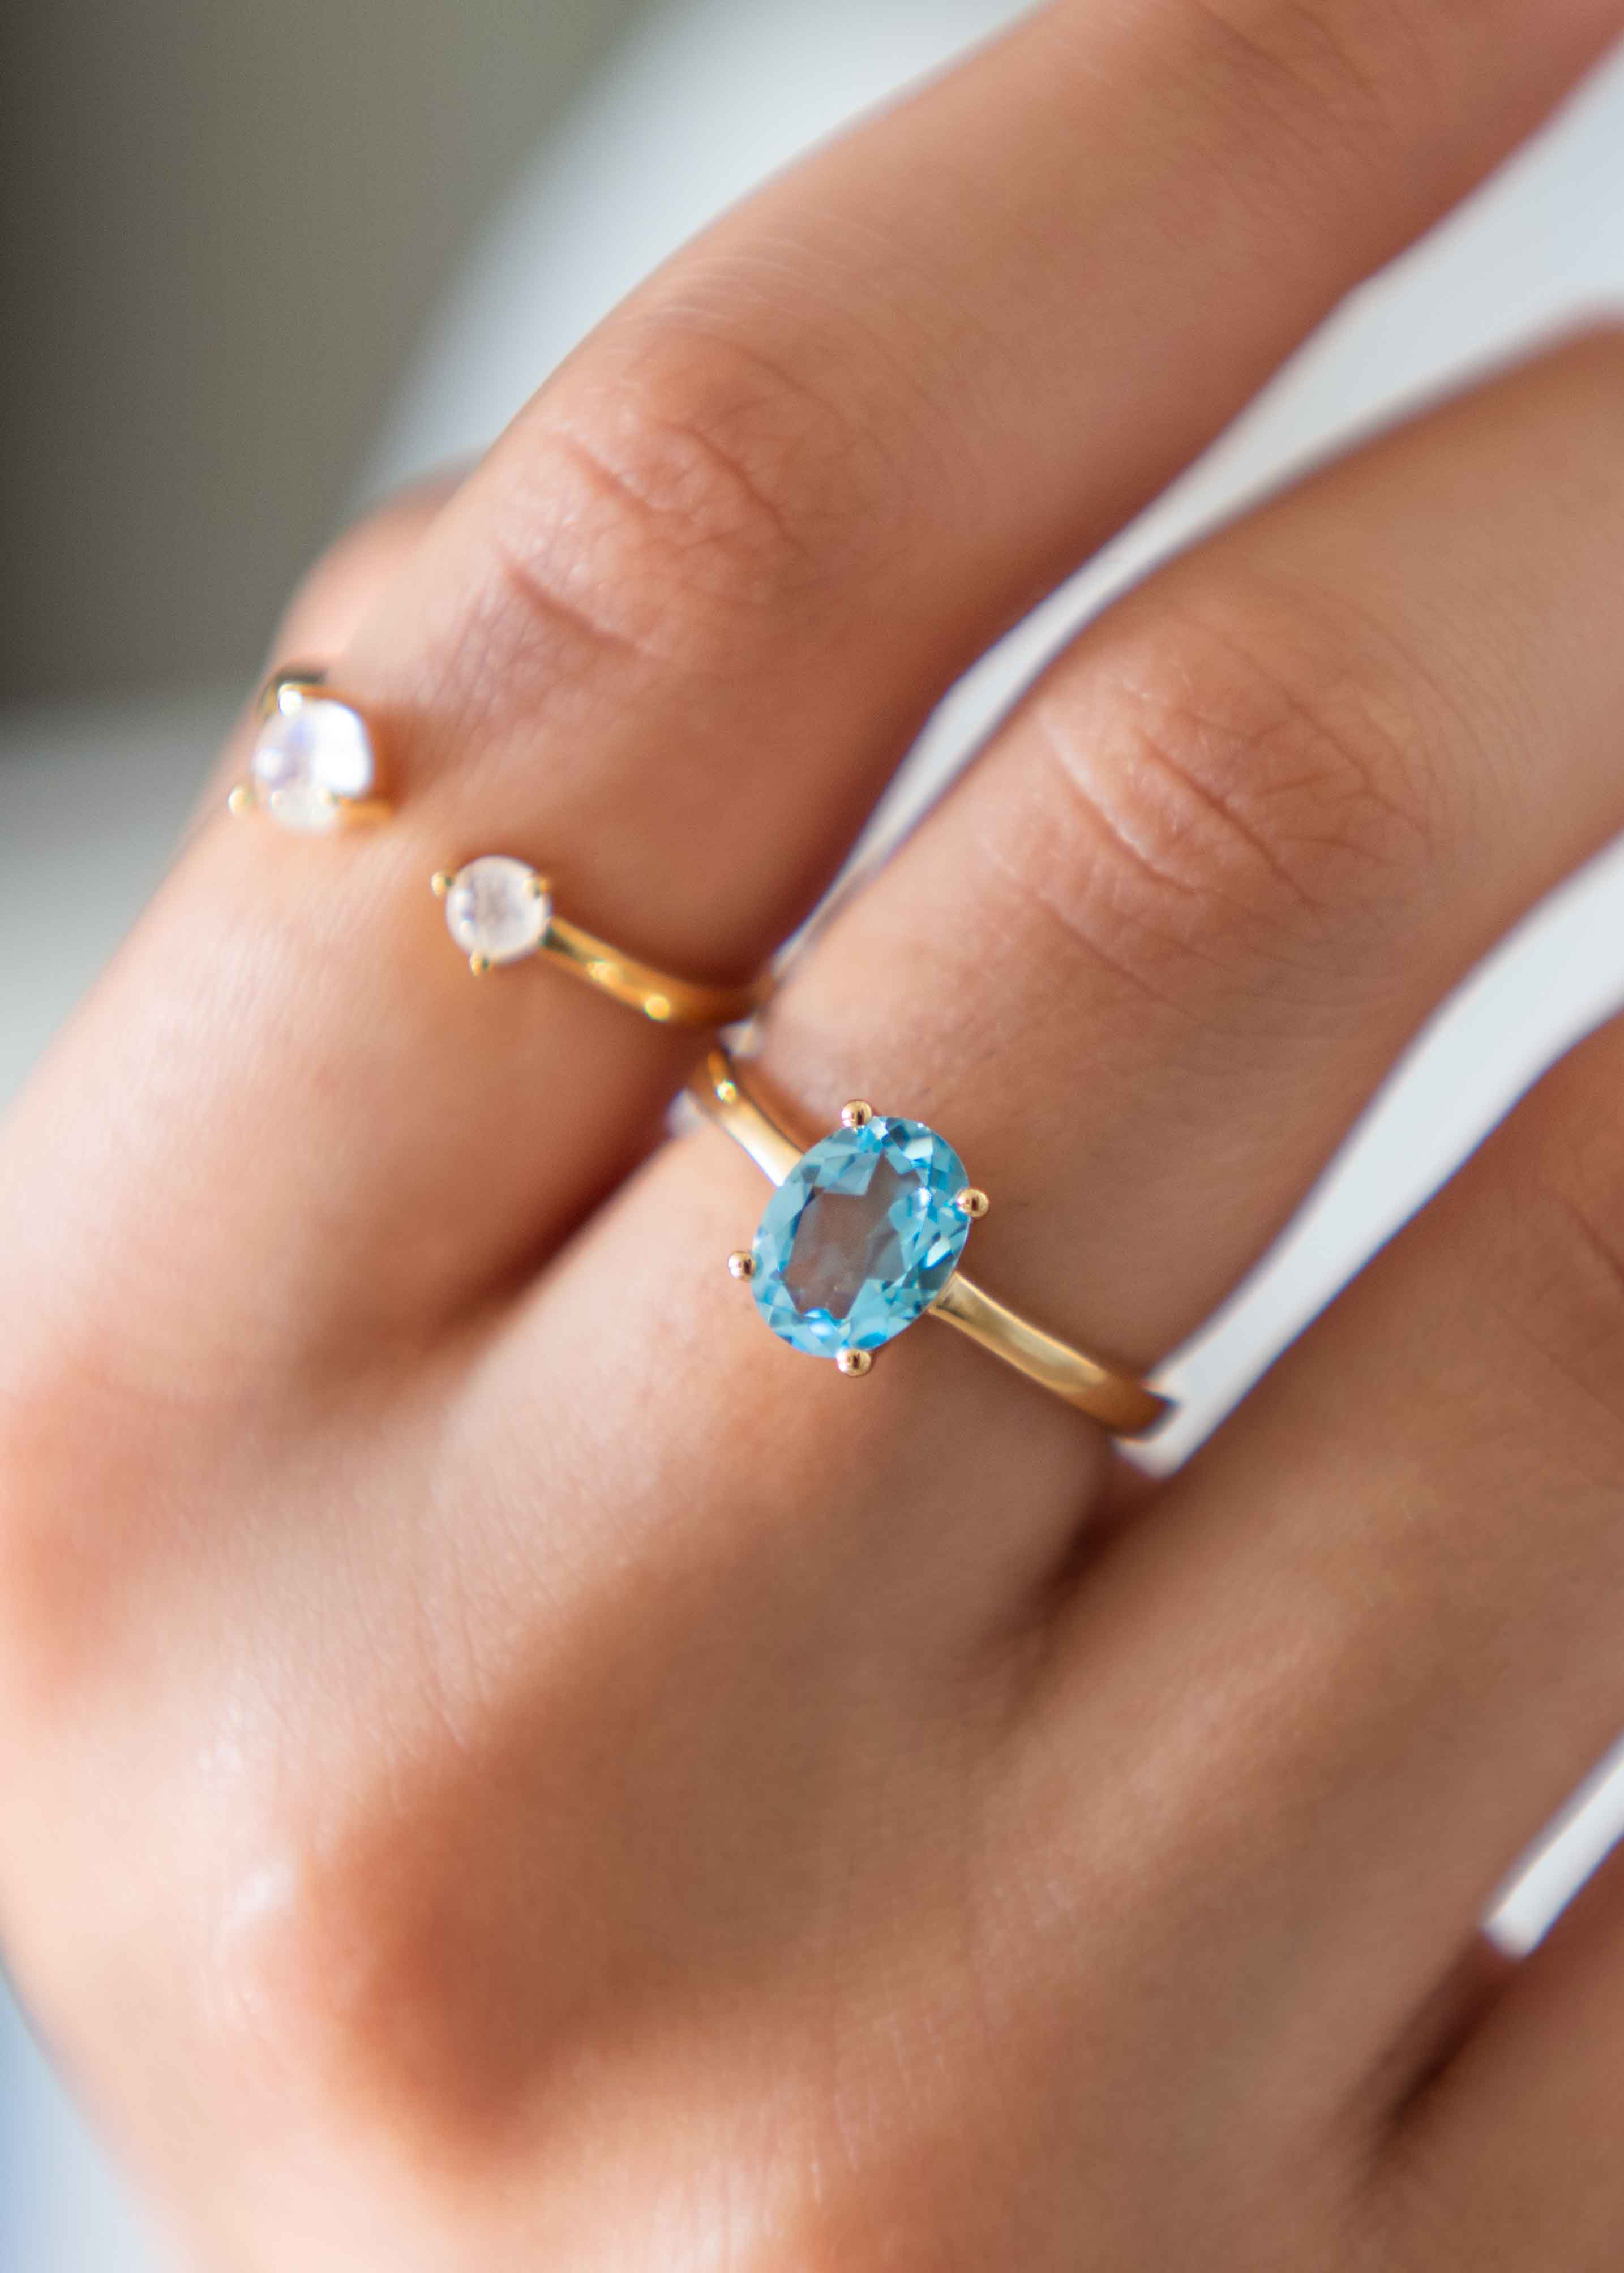 Swiss Blue Topaz Ring in 14k gold vermeil, Engagement, Promise Gifts for Her